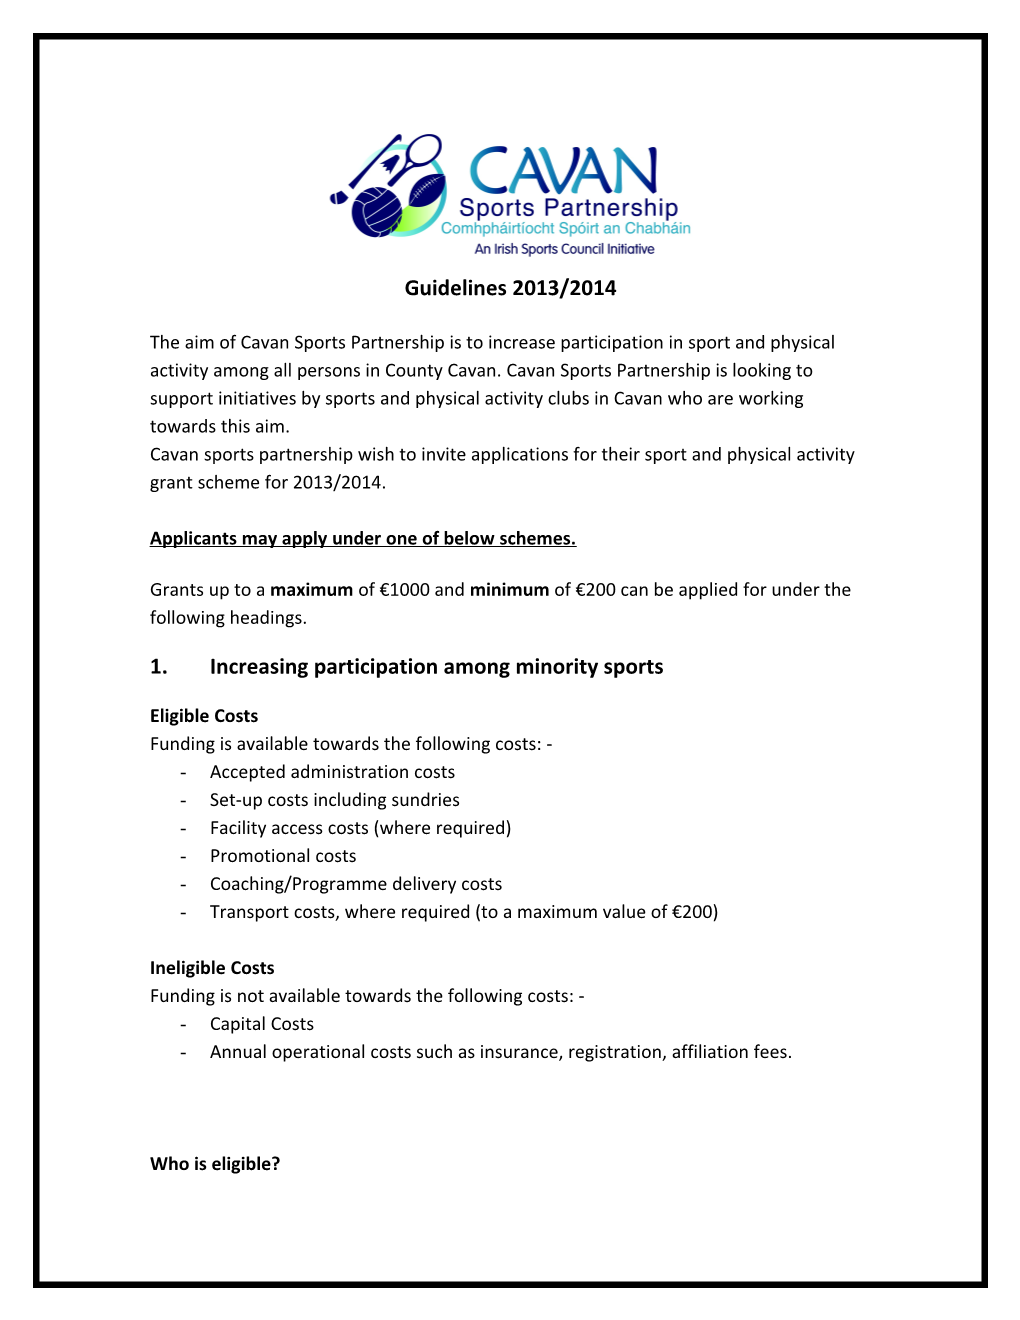 The Aim of Cavan Sports Partnership Is to Increase Participation in Sport and Physical